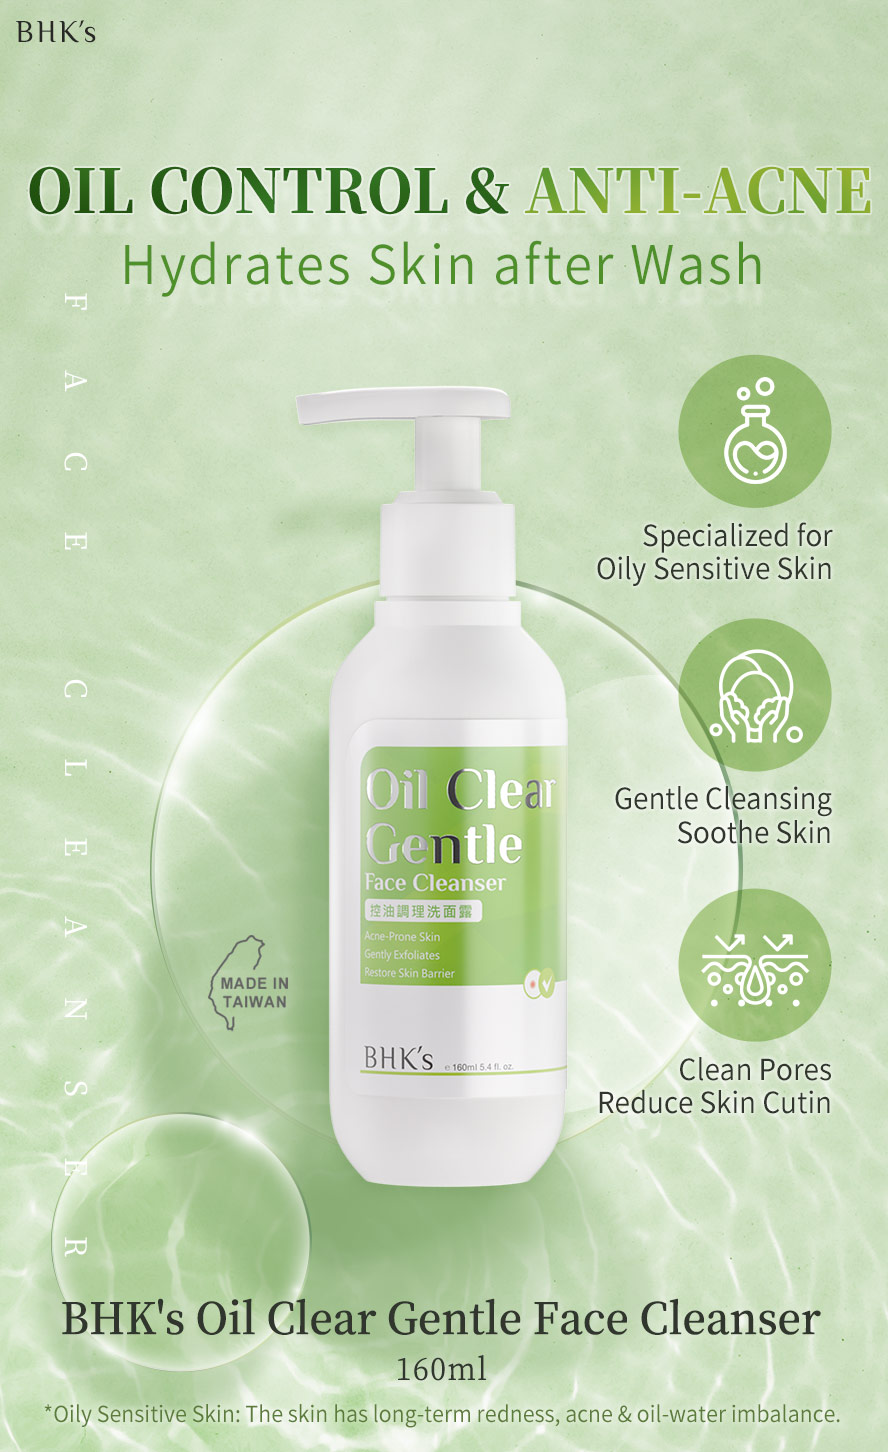 BHK's Oil Clear Gentle Face Cleanser is a gentle face wash specialized for oily-sensitive skin on oil-control & anti-acne.